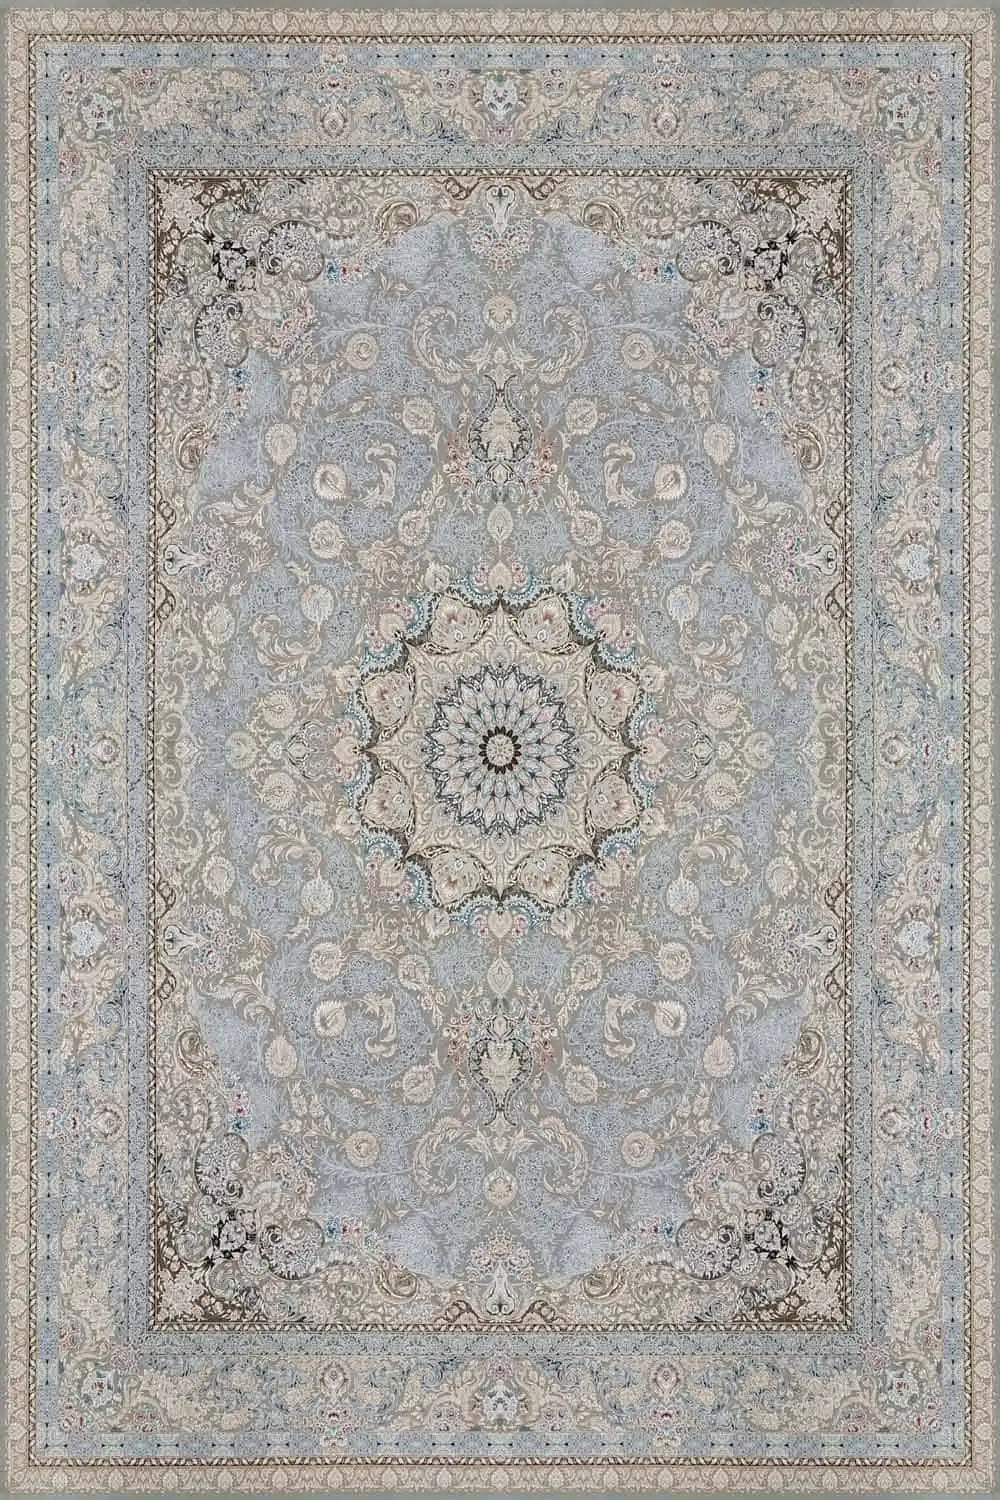 7608 Silver Traditional Persian Area Rug